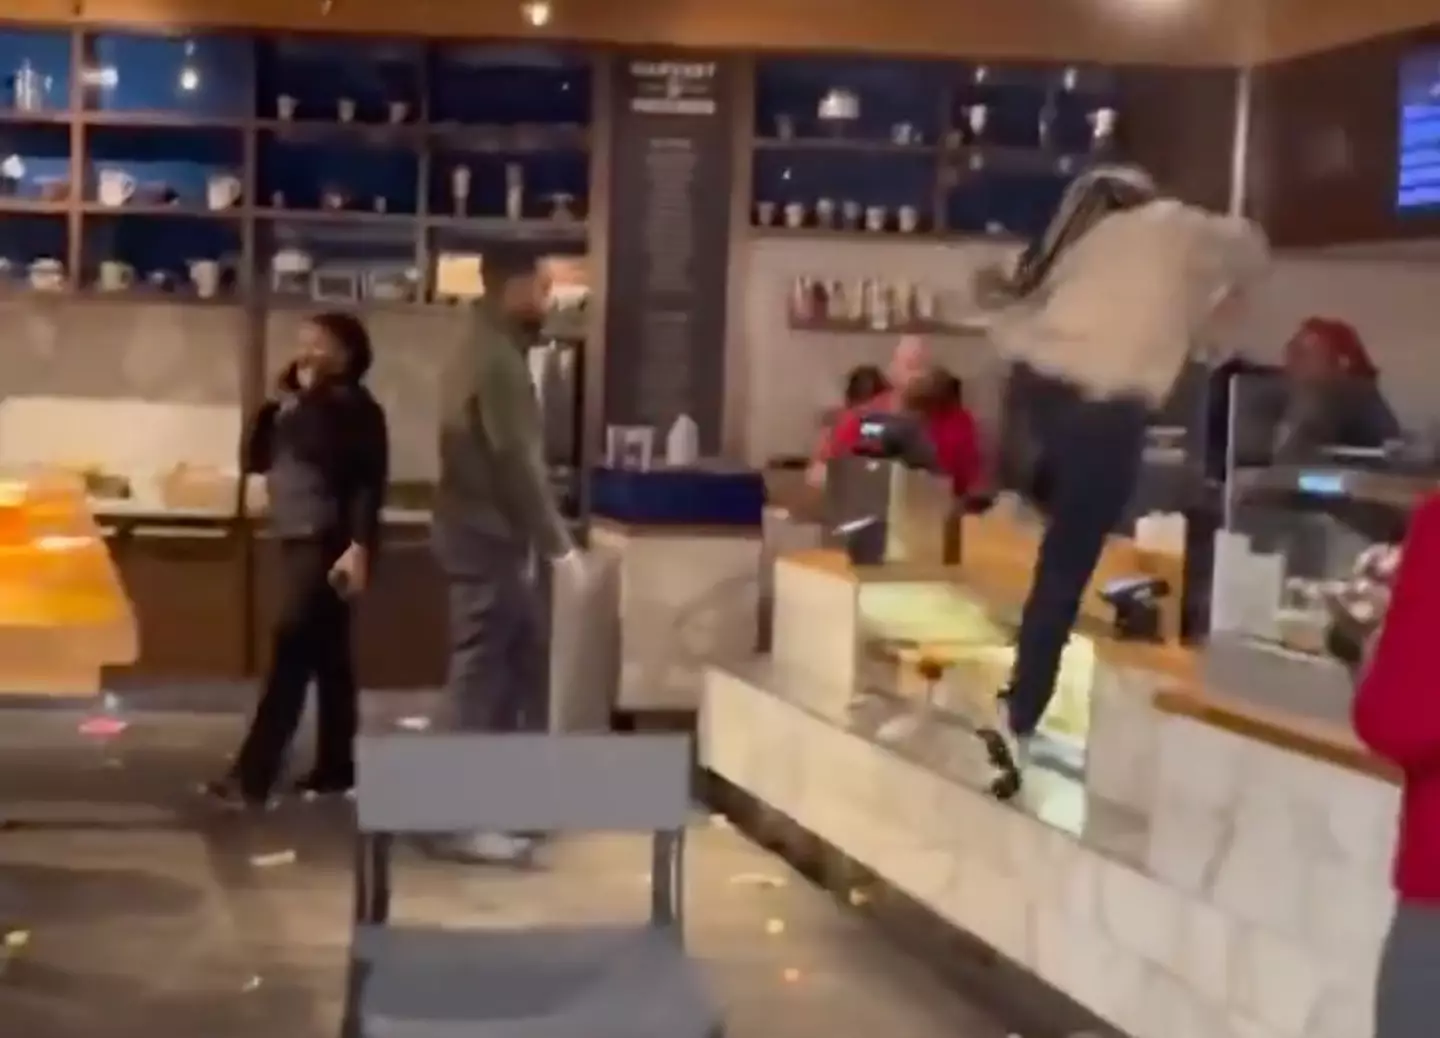 The employee leaps over the counter.